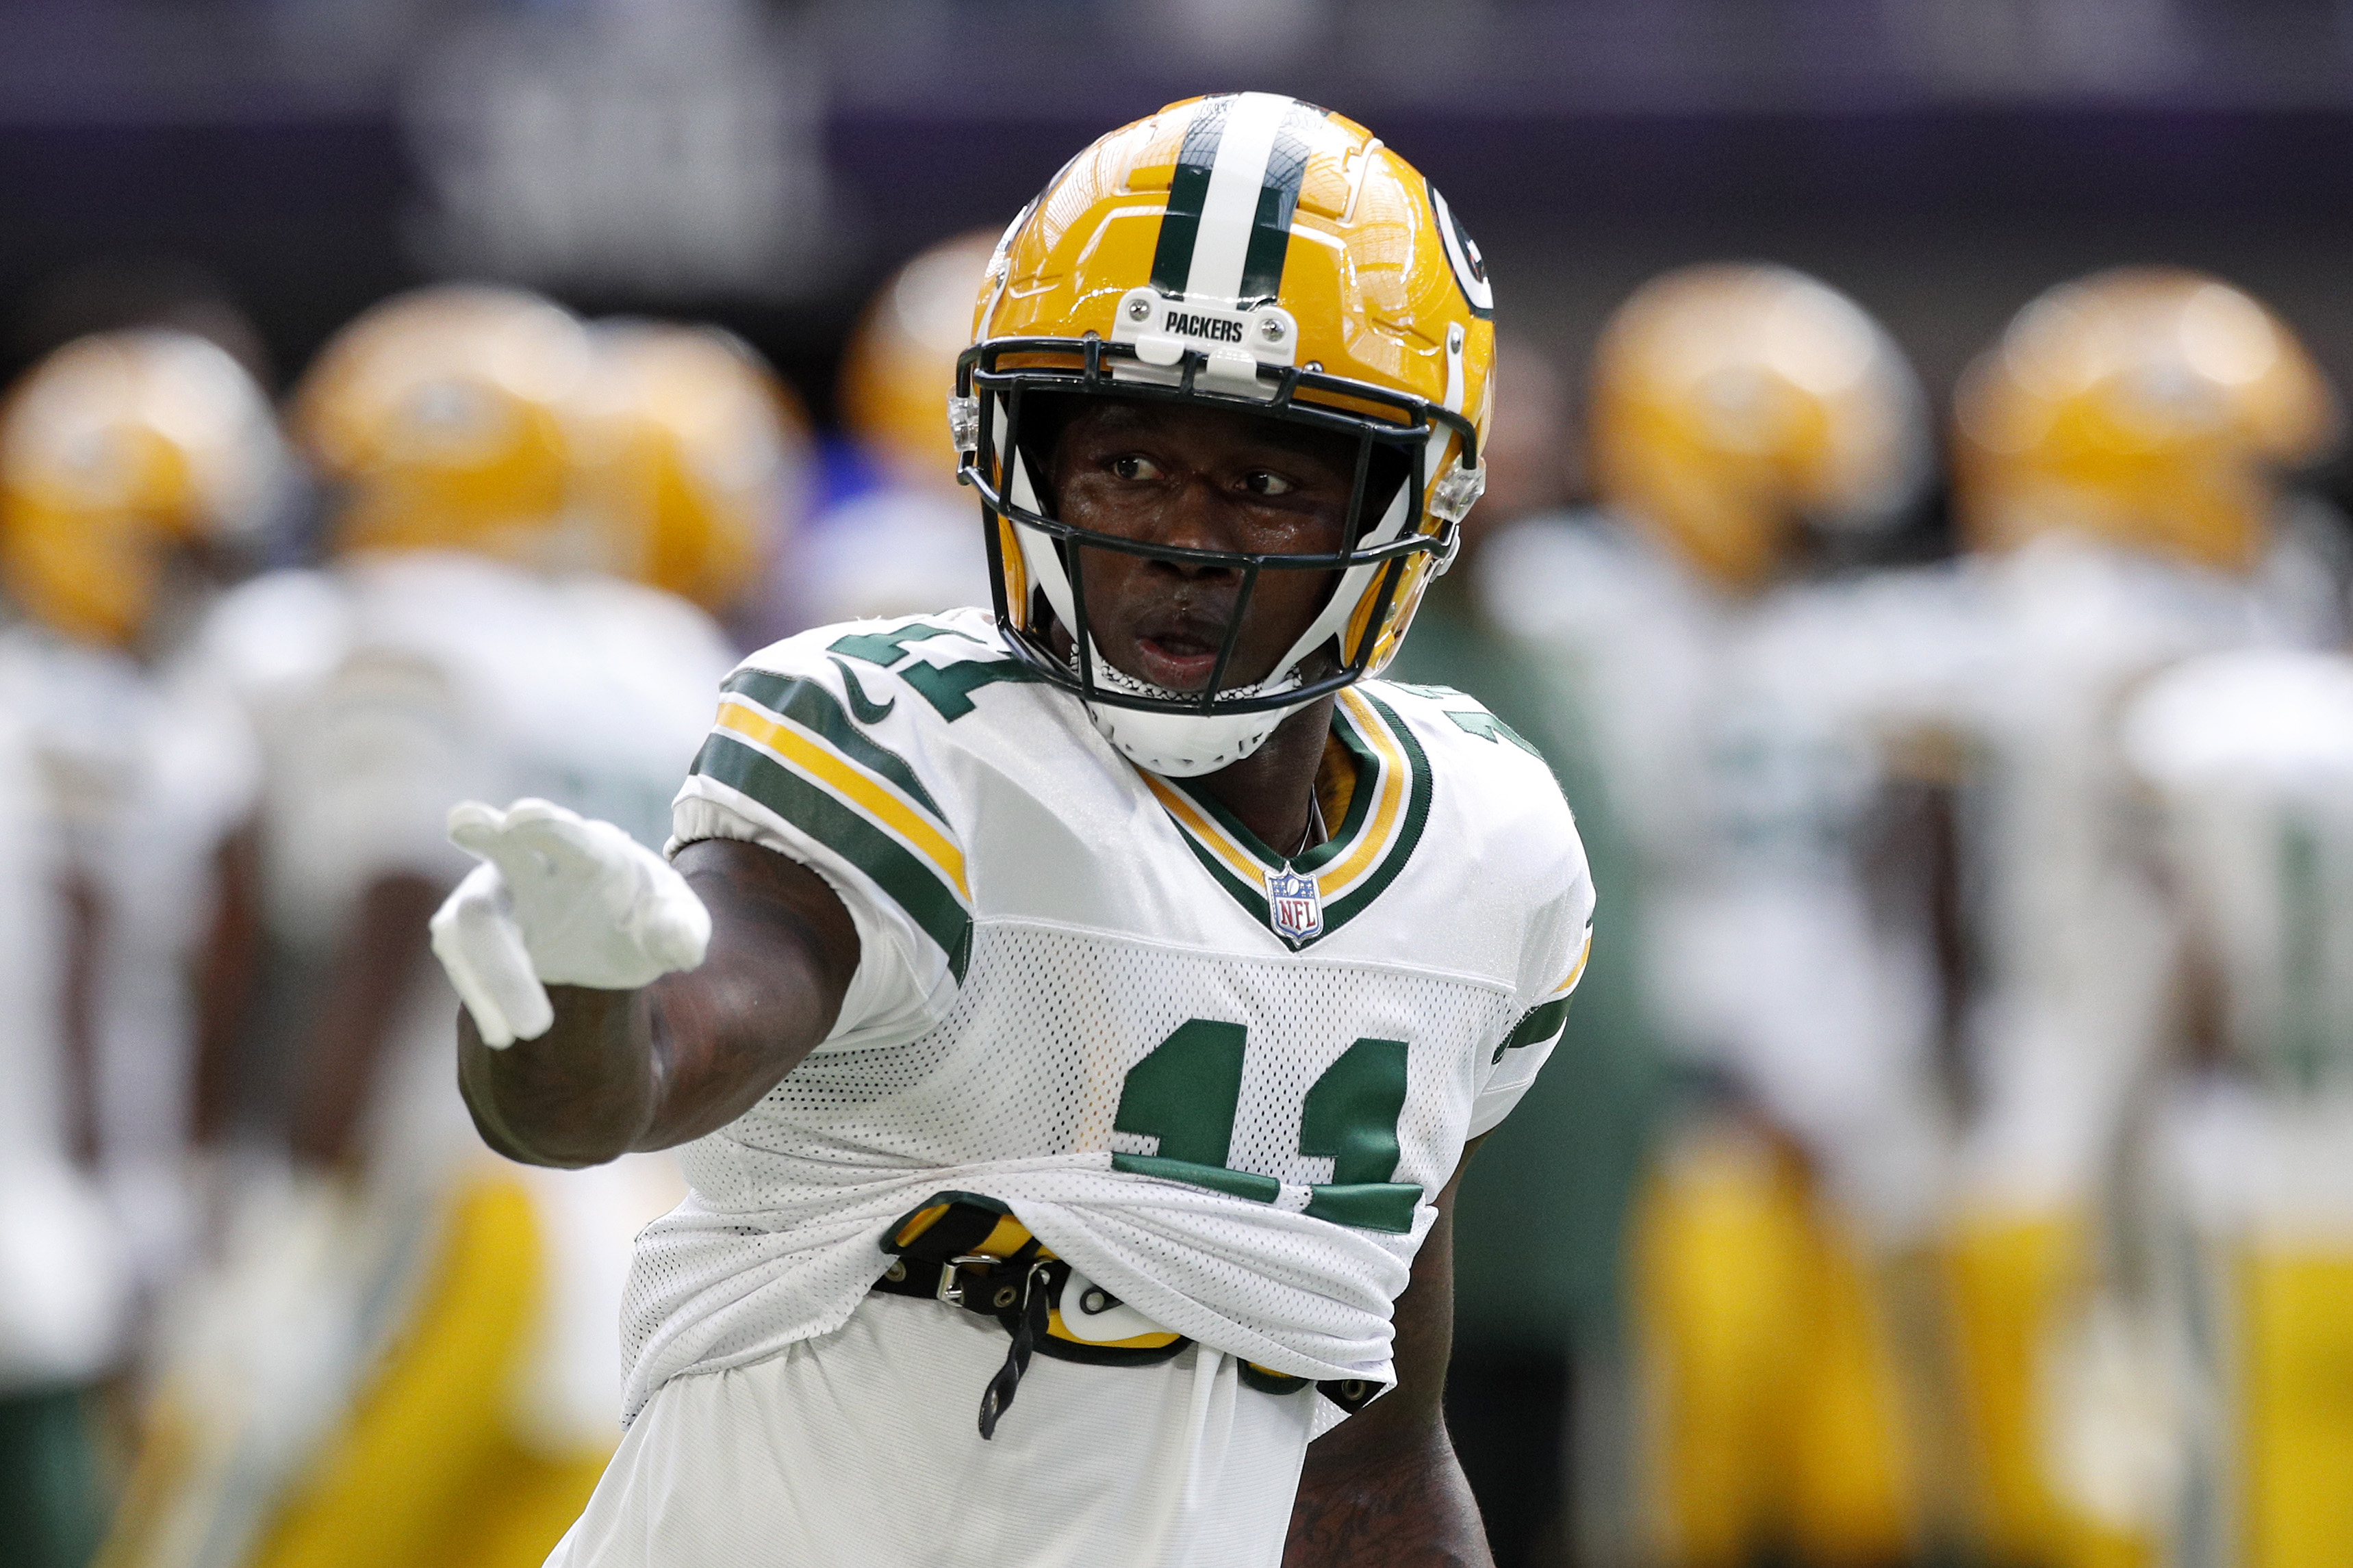 Sammy Watkins of the Green Bay Packers warms up before the game against the Minnesota Vikings.